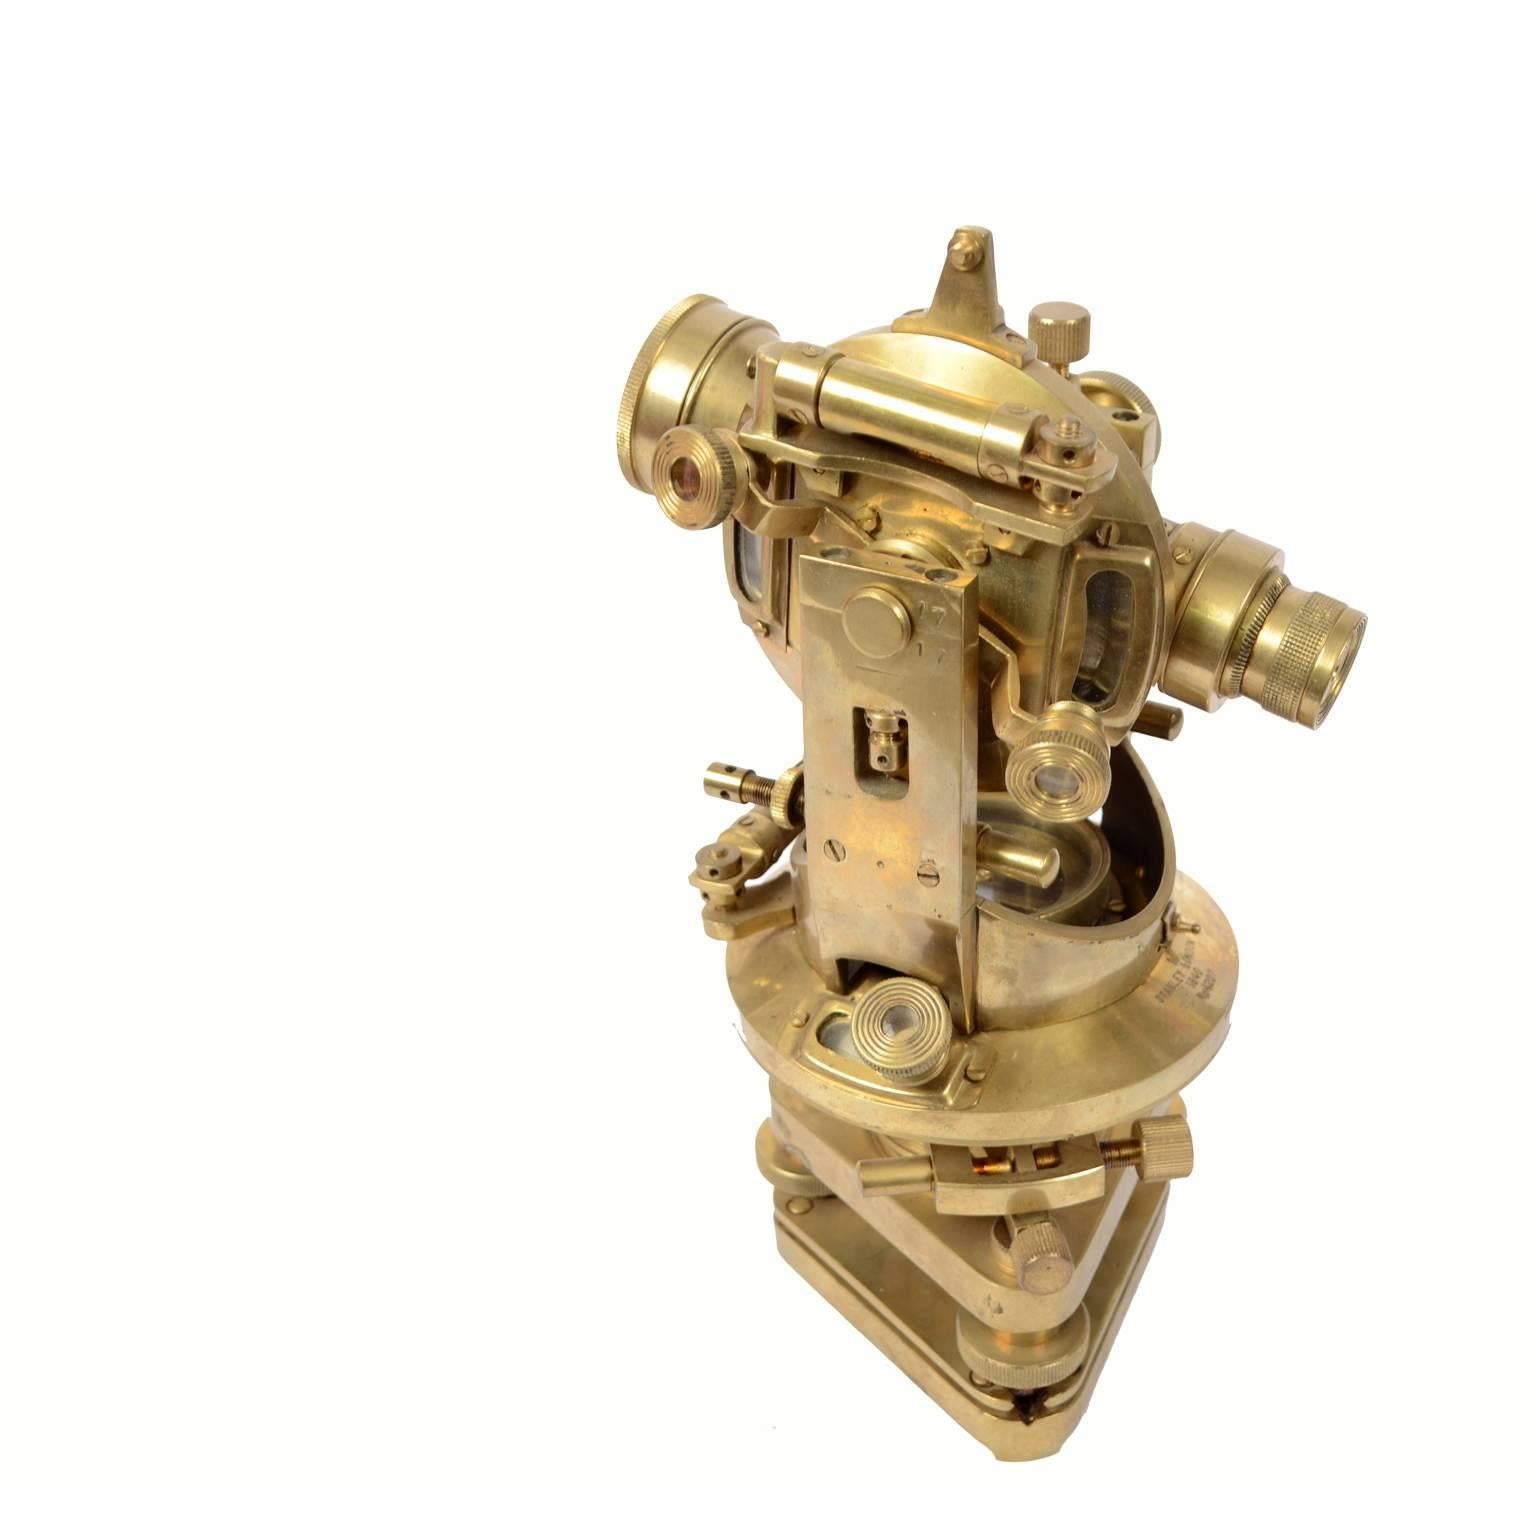 Antique brass theodolite signed Stanley London n. 4207, 1940s. Measures: Height cm 28, width cm 15. Good condition. A theodolite is an antique topographic instruments used for terrestrial observations for measure horizontal and vertical angles. This